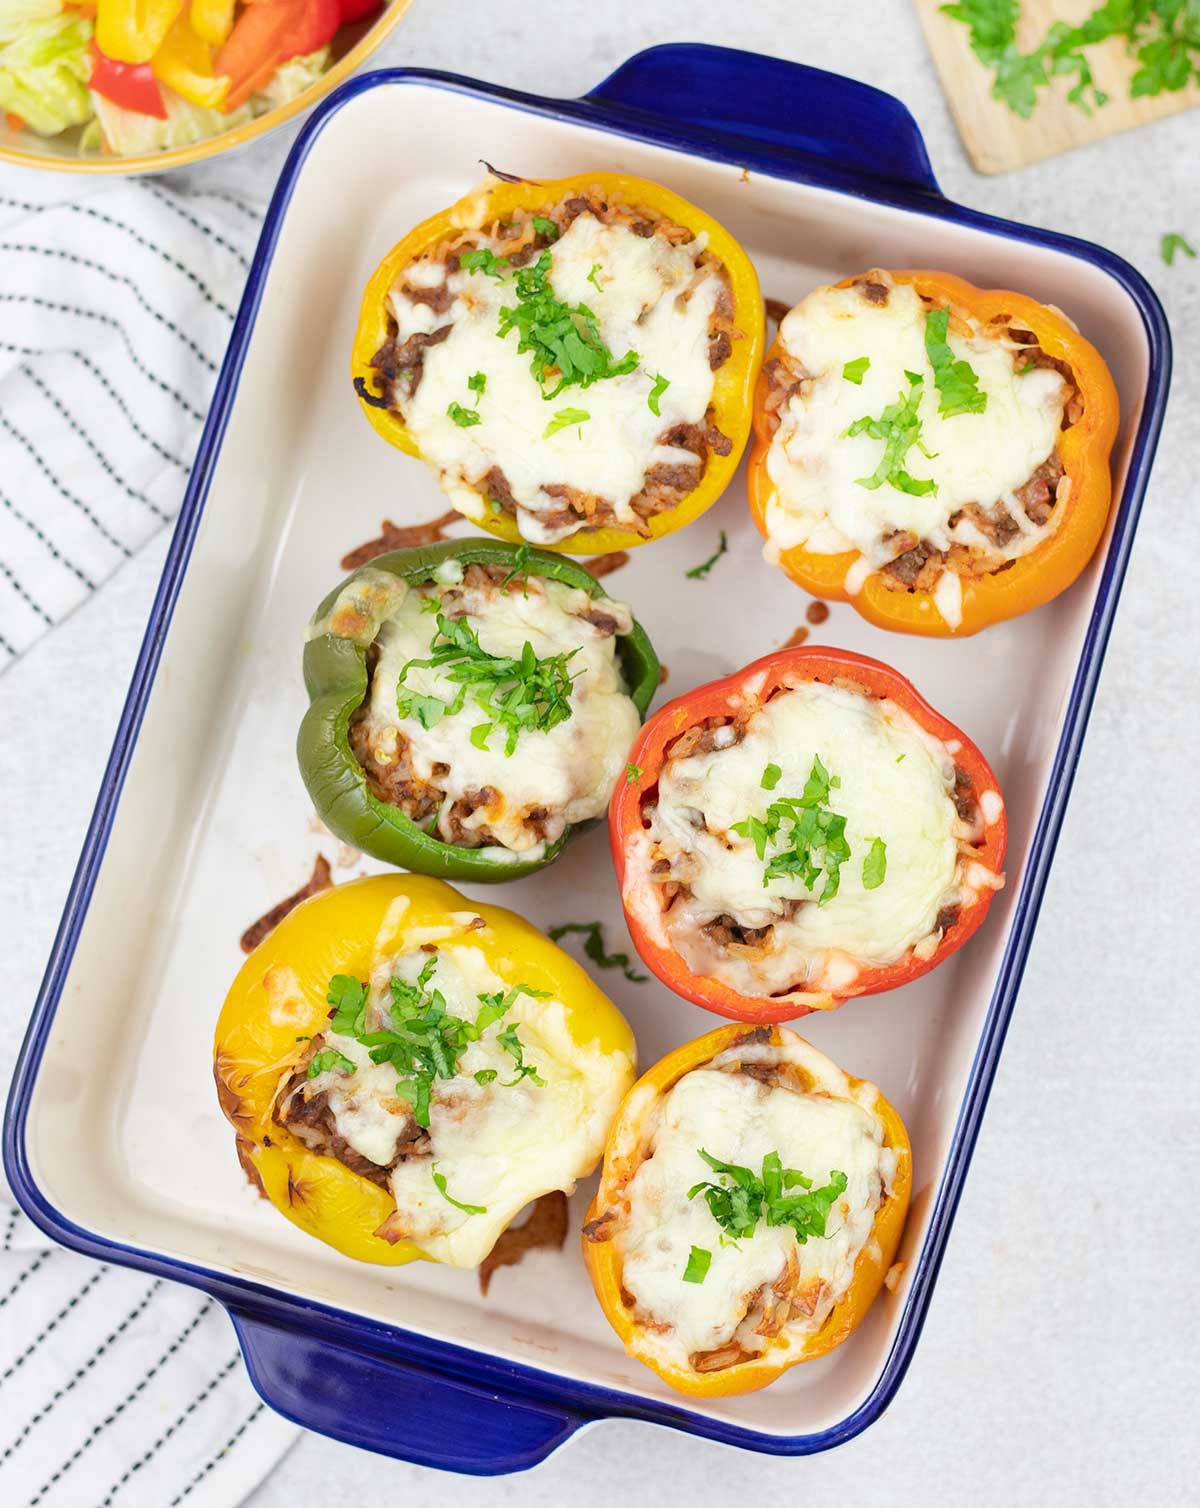 Baked stuffed bell peppers with rice and ground beef in a baking pan.